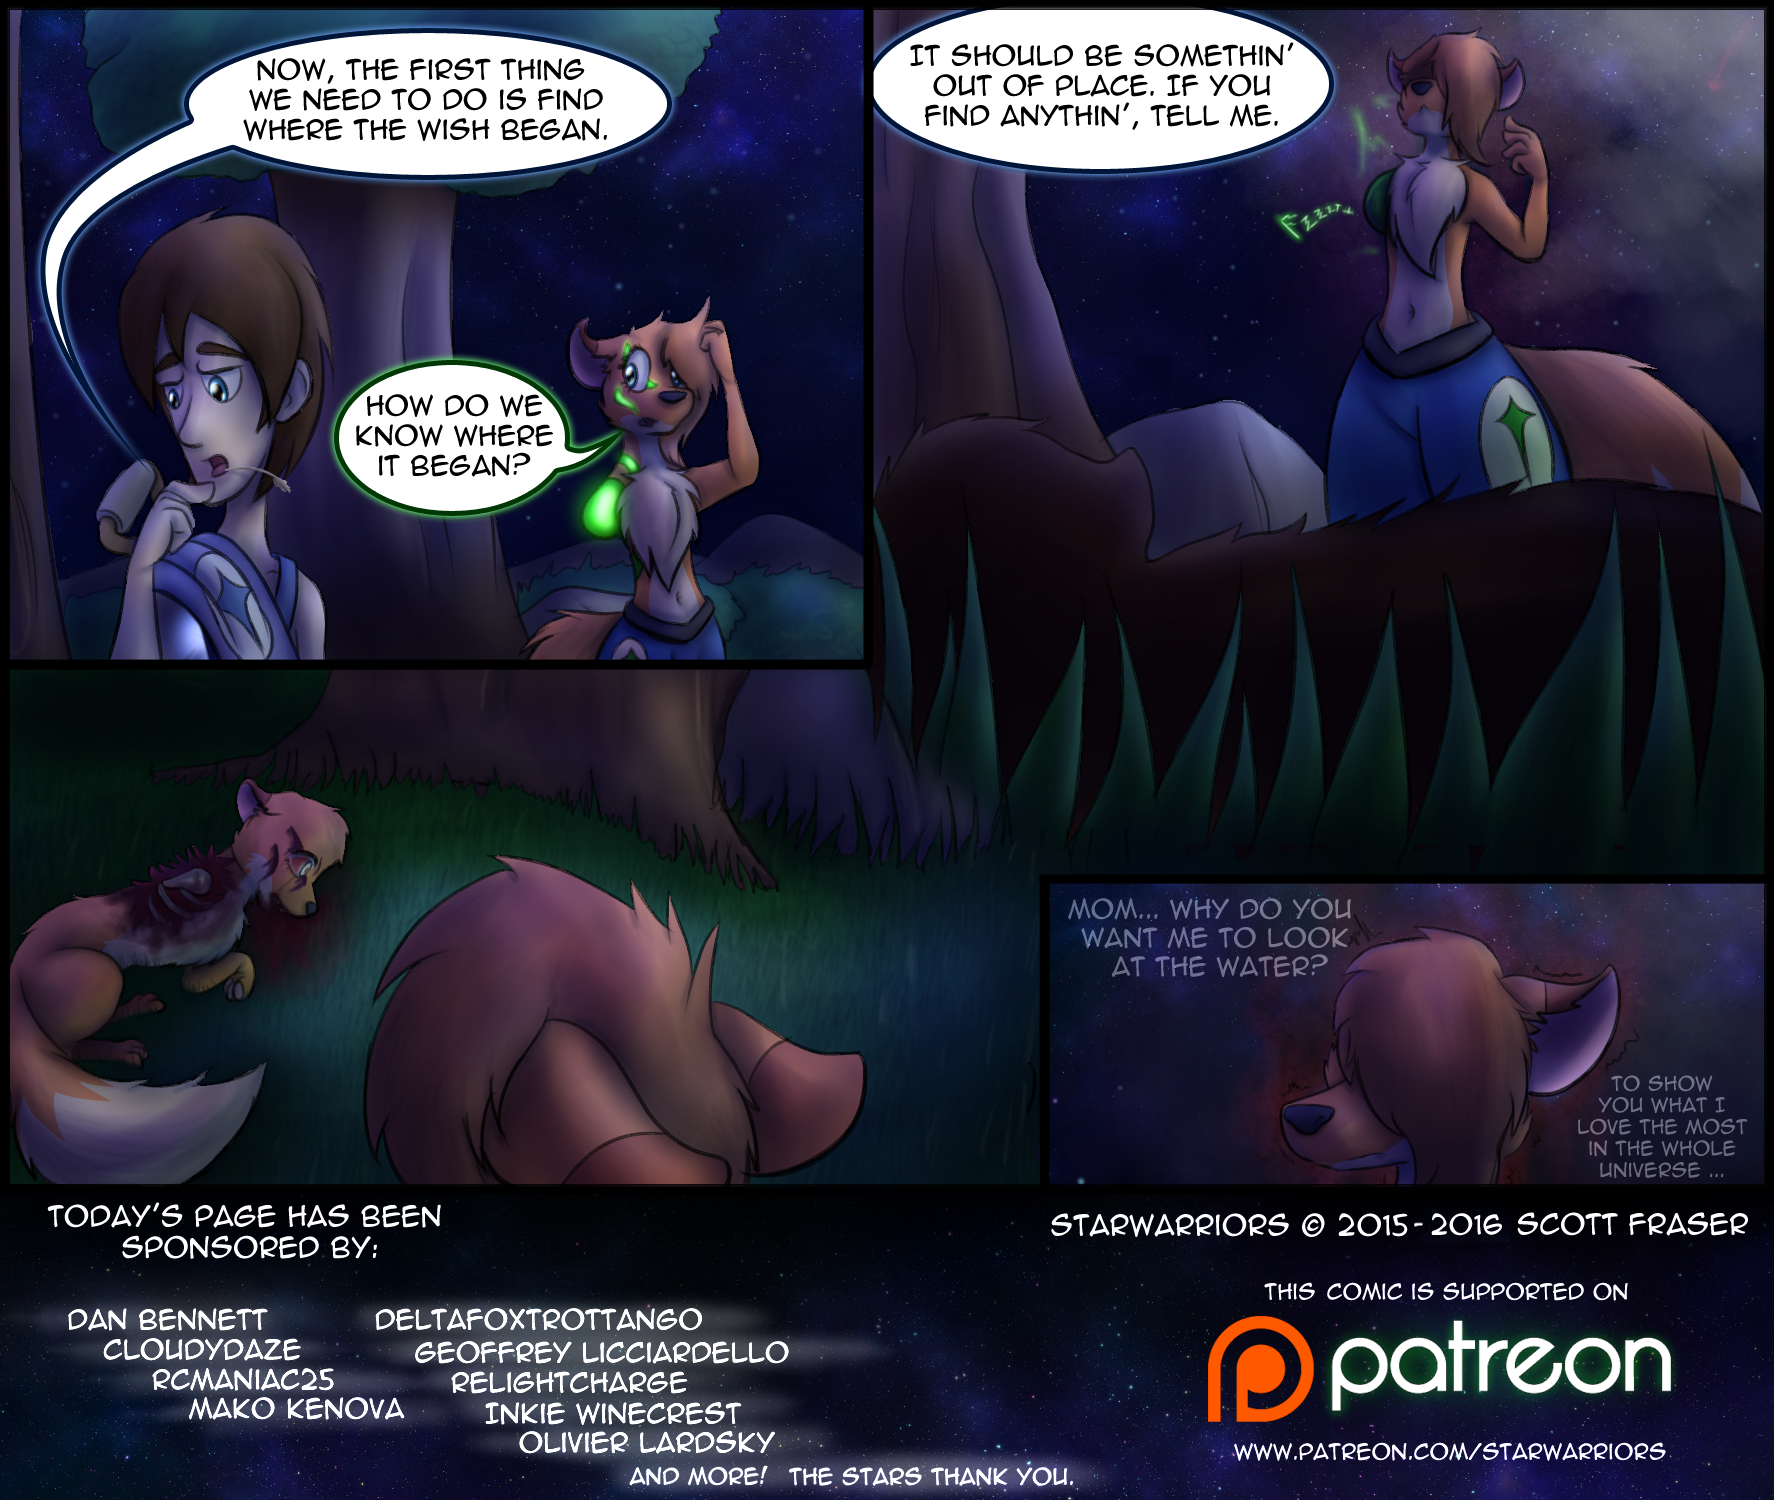 Ch2 Page 4 – Out of Place